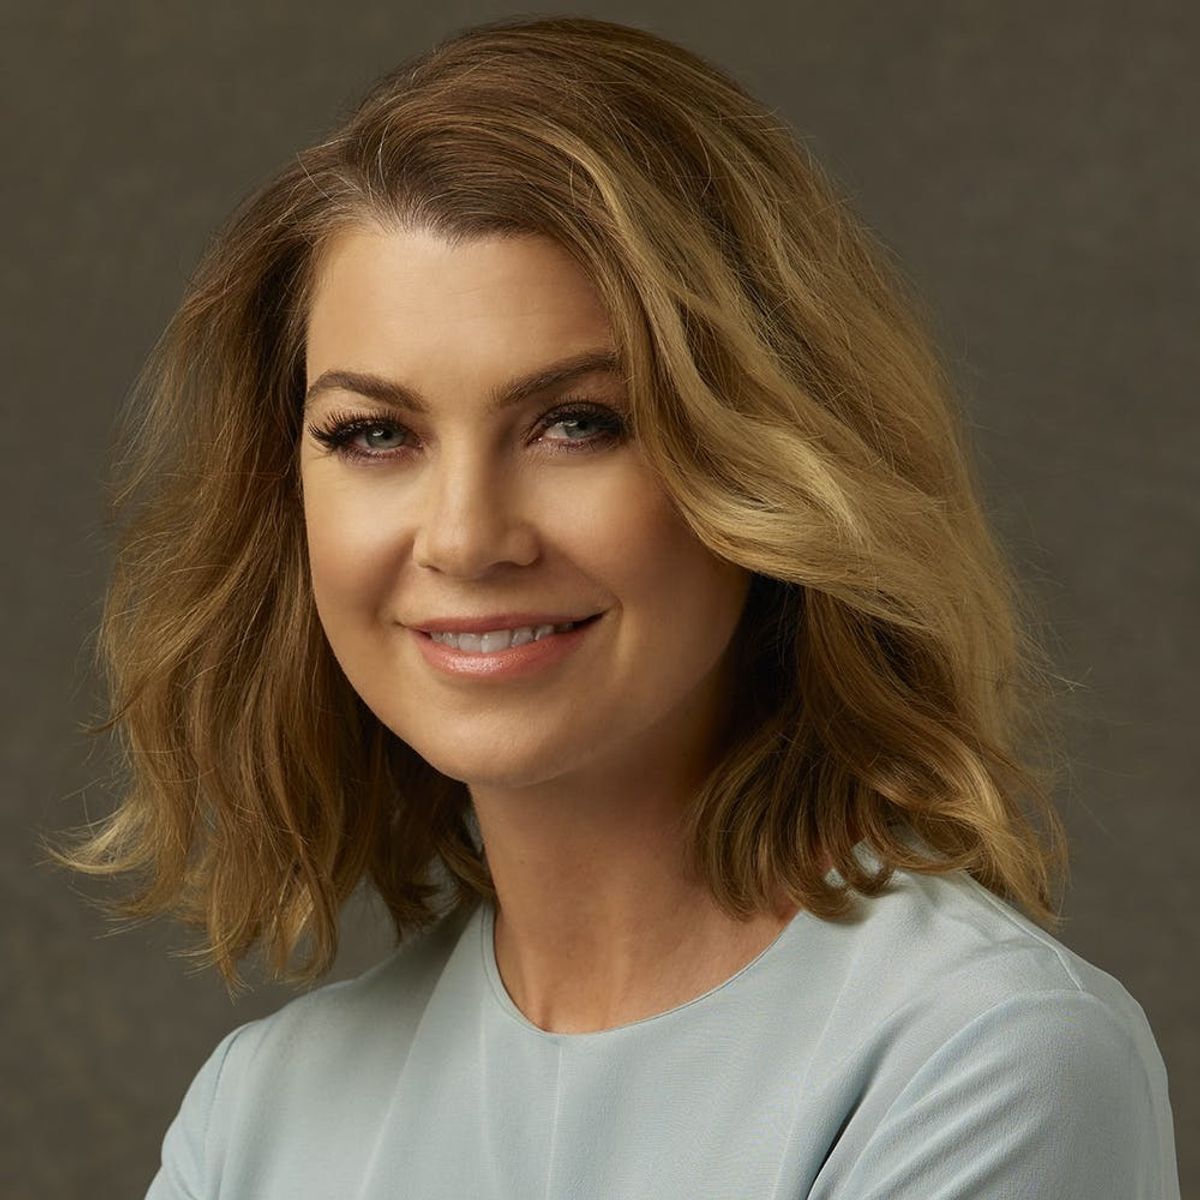 Ellen Pompeo Is Calling Out the Sexist Claim That Her Salary Caused ‘Grey’s Anatomy’ Cast Changes